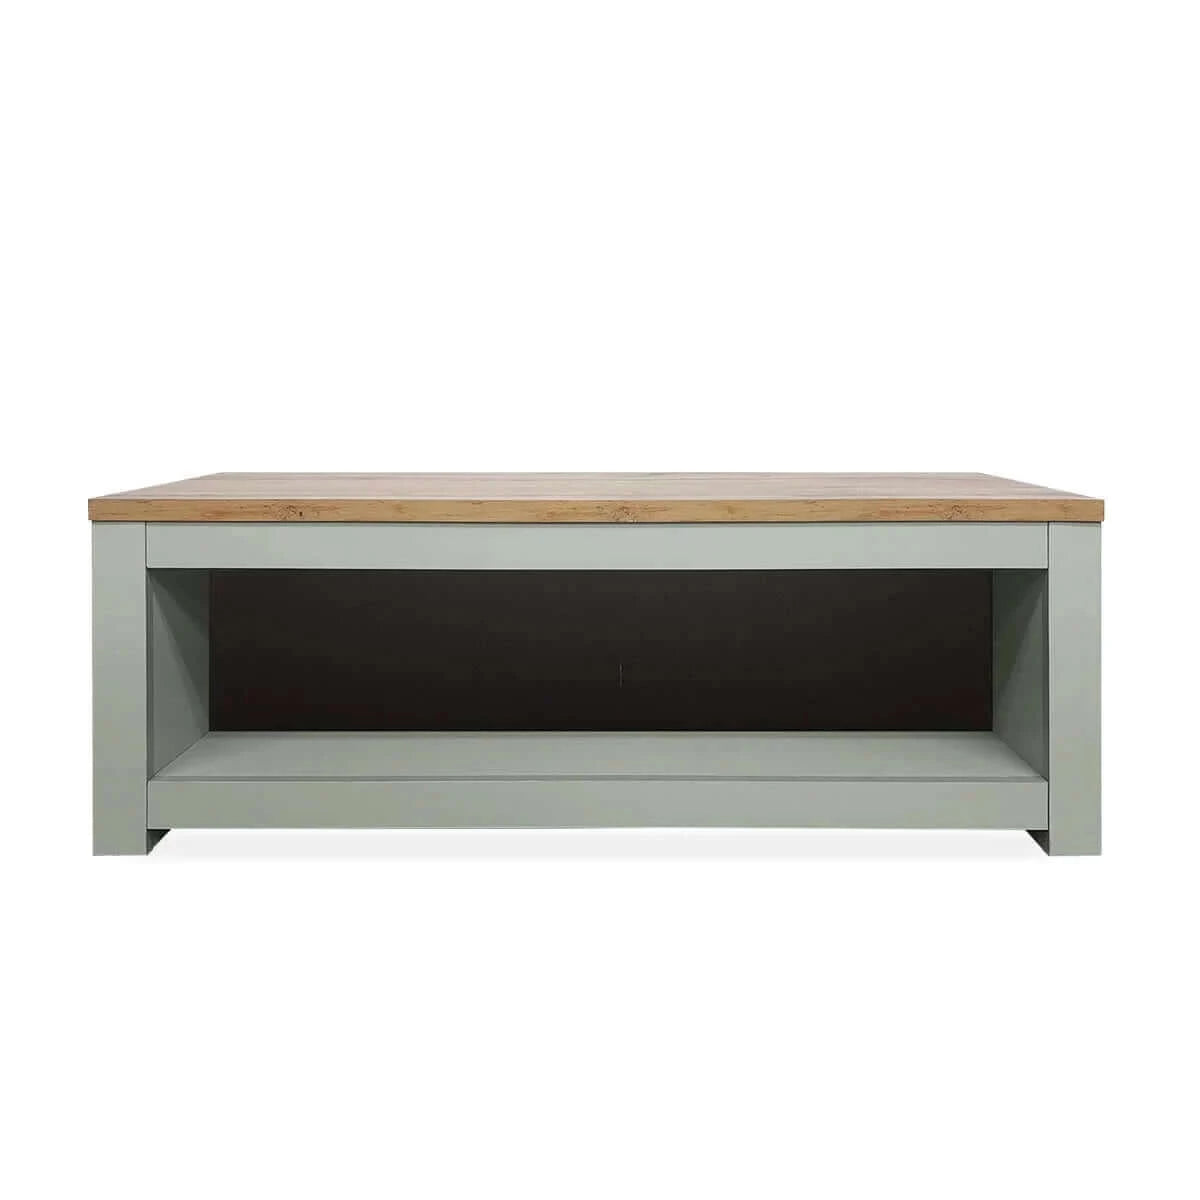 Buy Home Master Winchester Two Tone Coffee Table Stylish Flawless Design – Upinteriors-Upinteriors